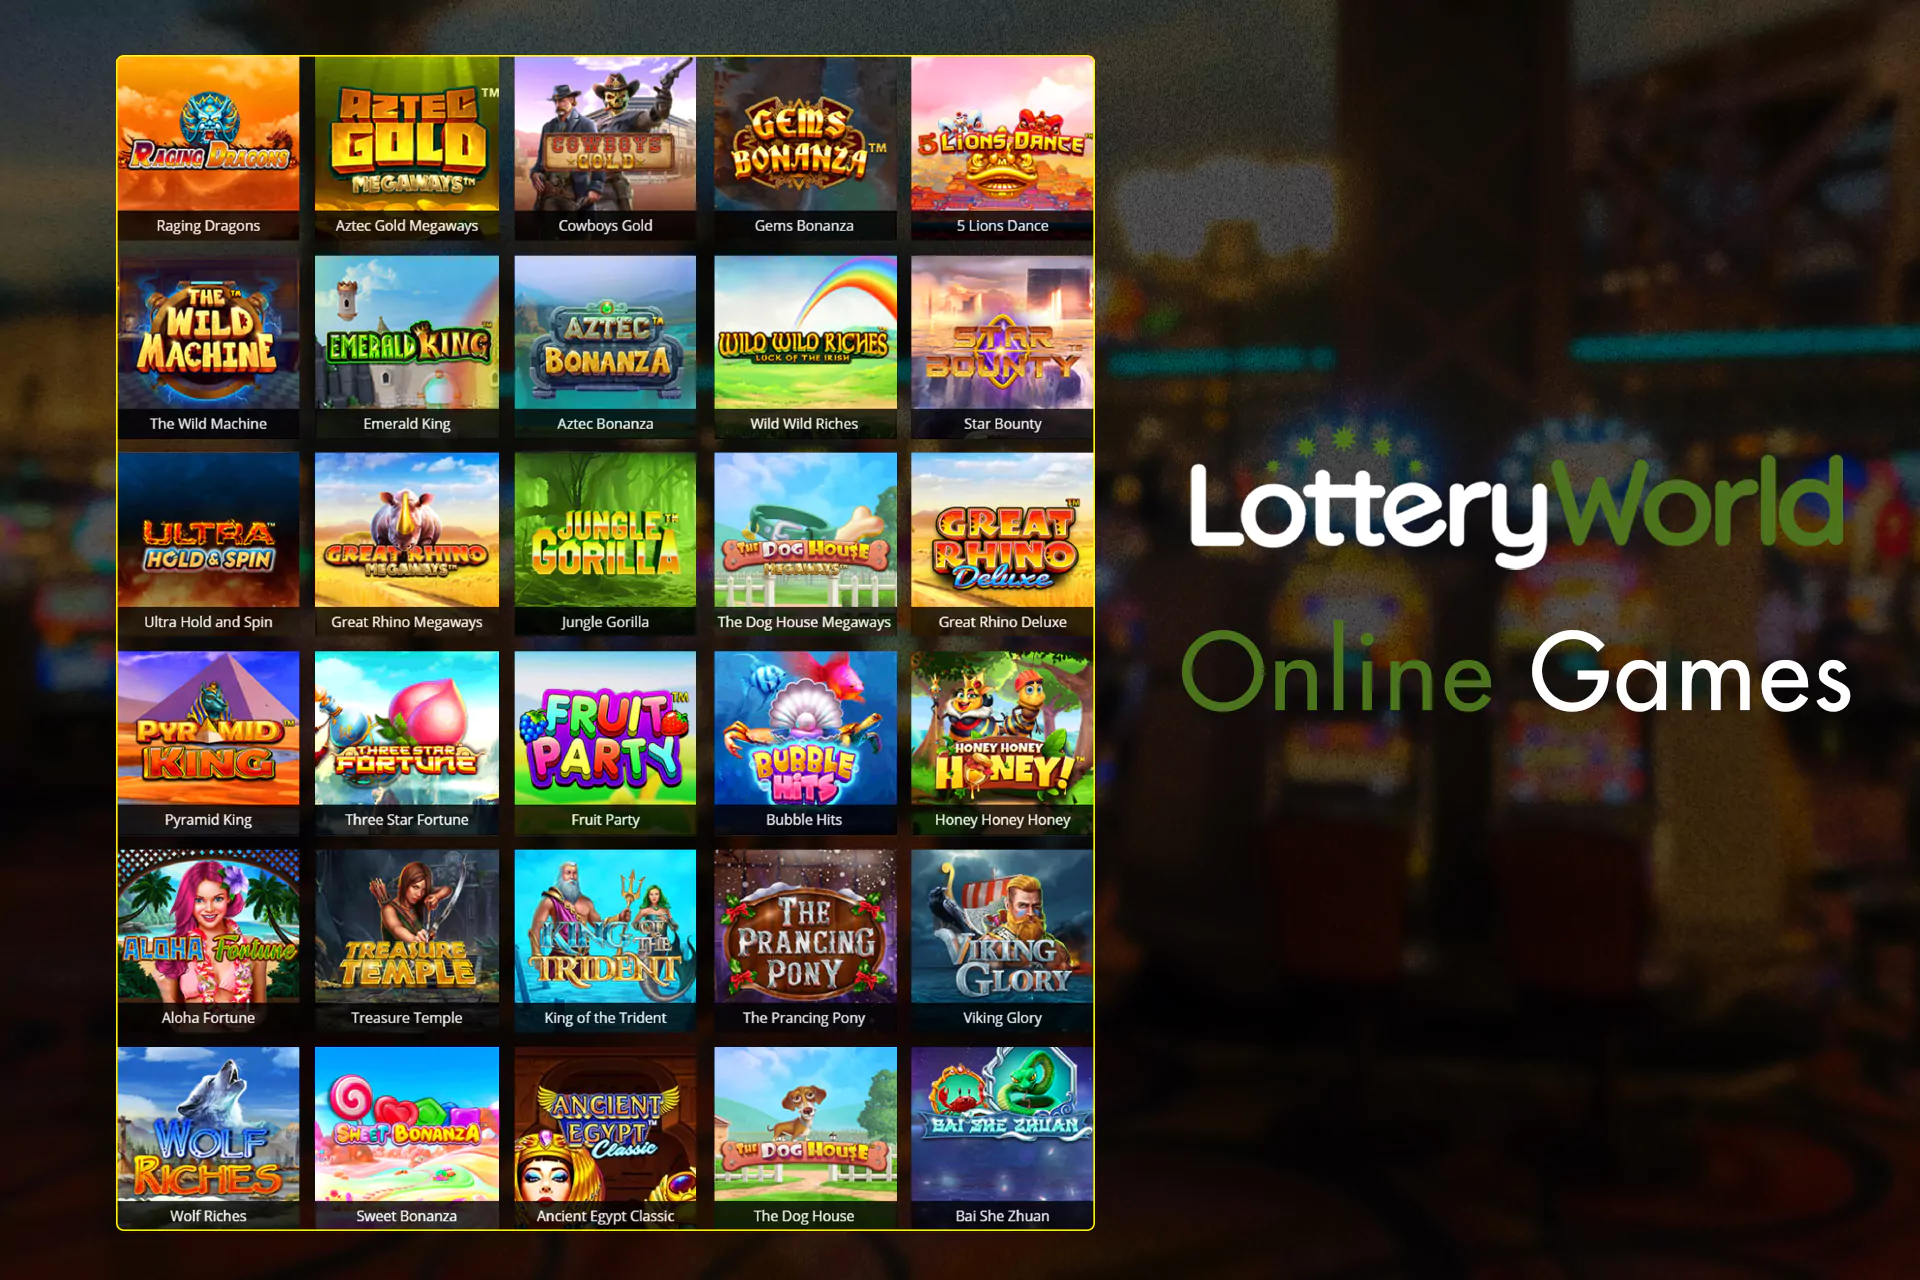 You can also check your fortune in the section of games playing online slots.